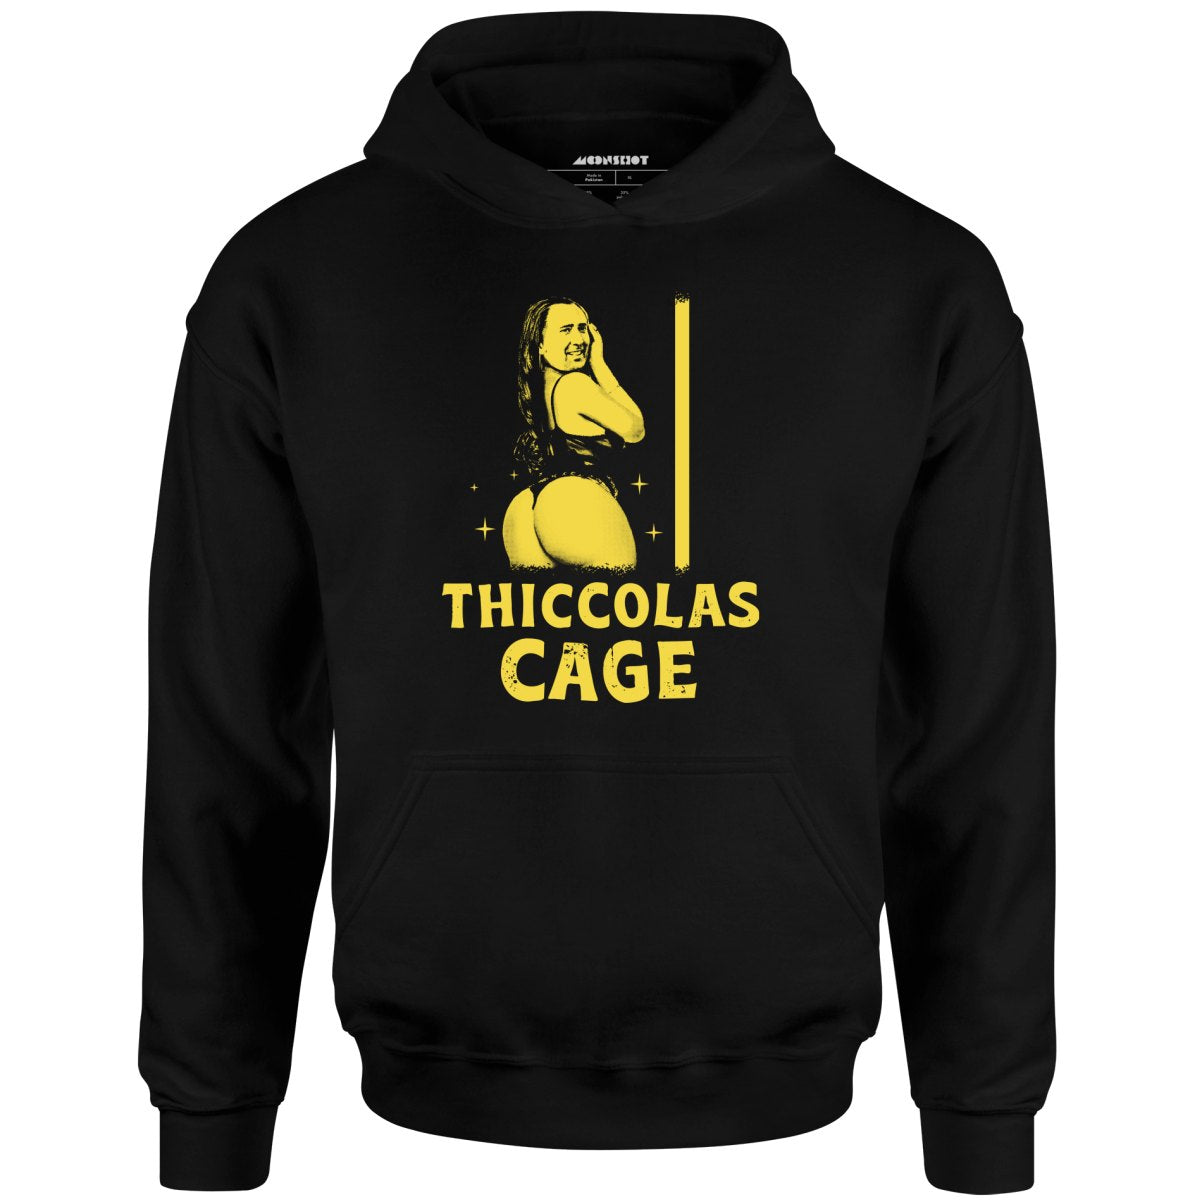 Thiccolas Cage - Unisex Hoodie